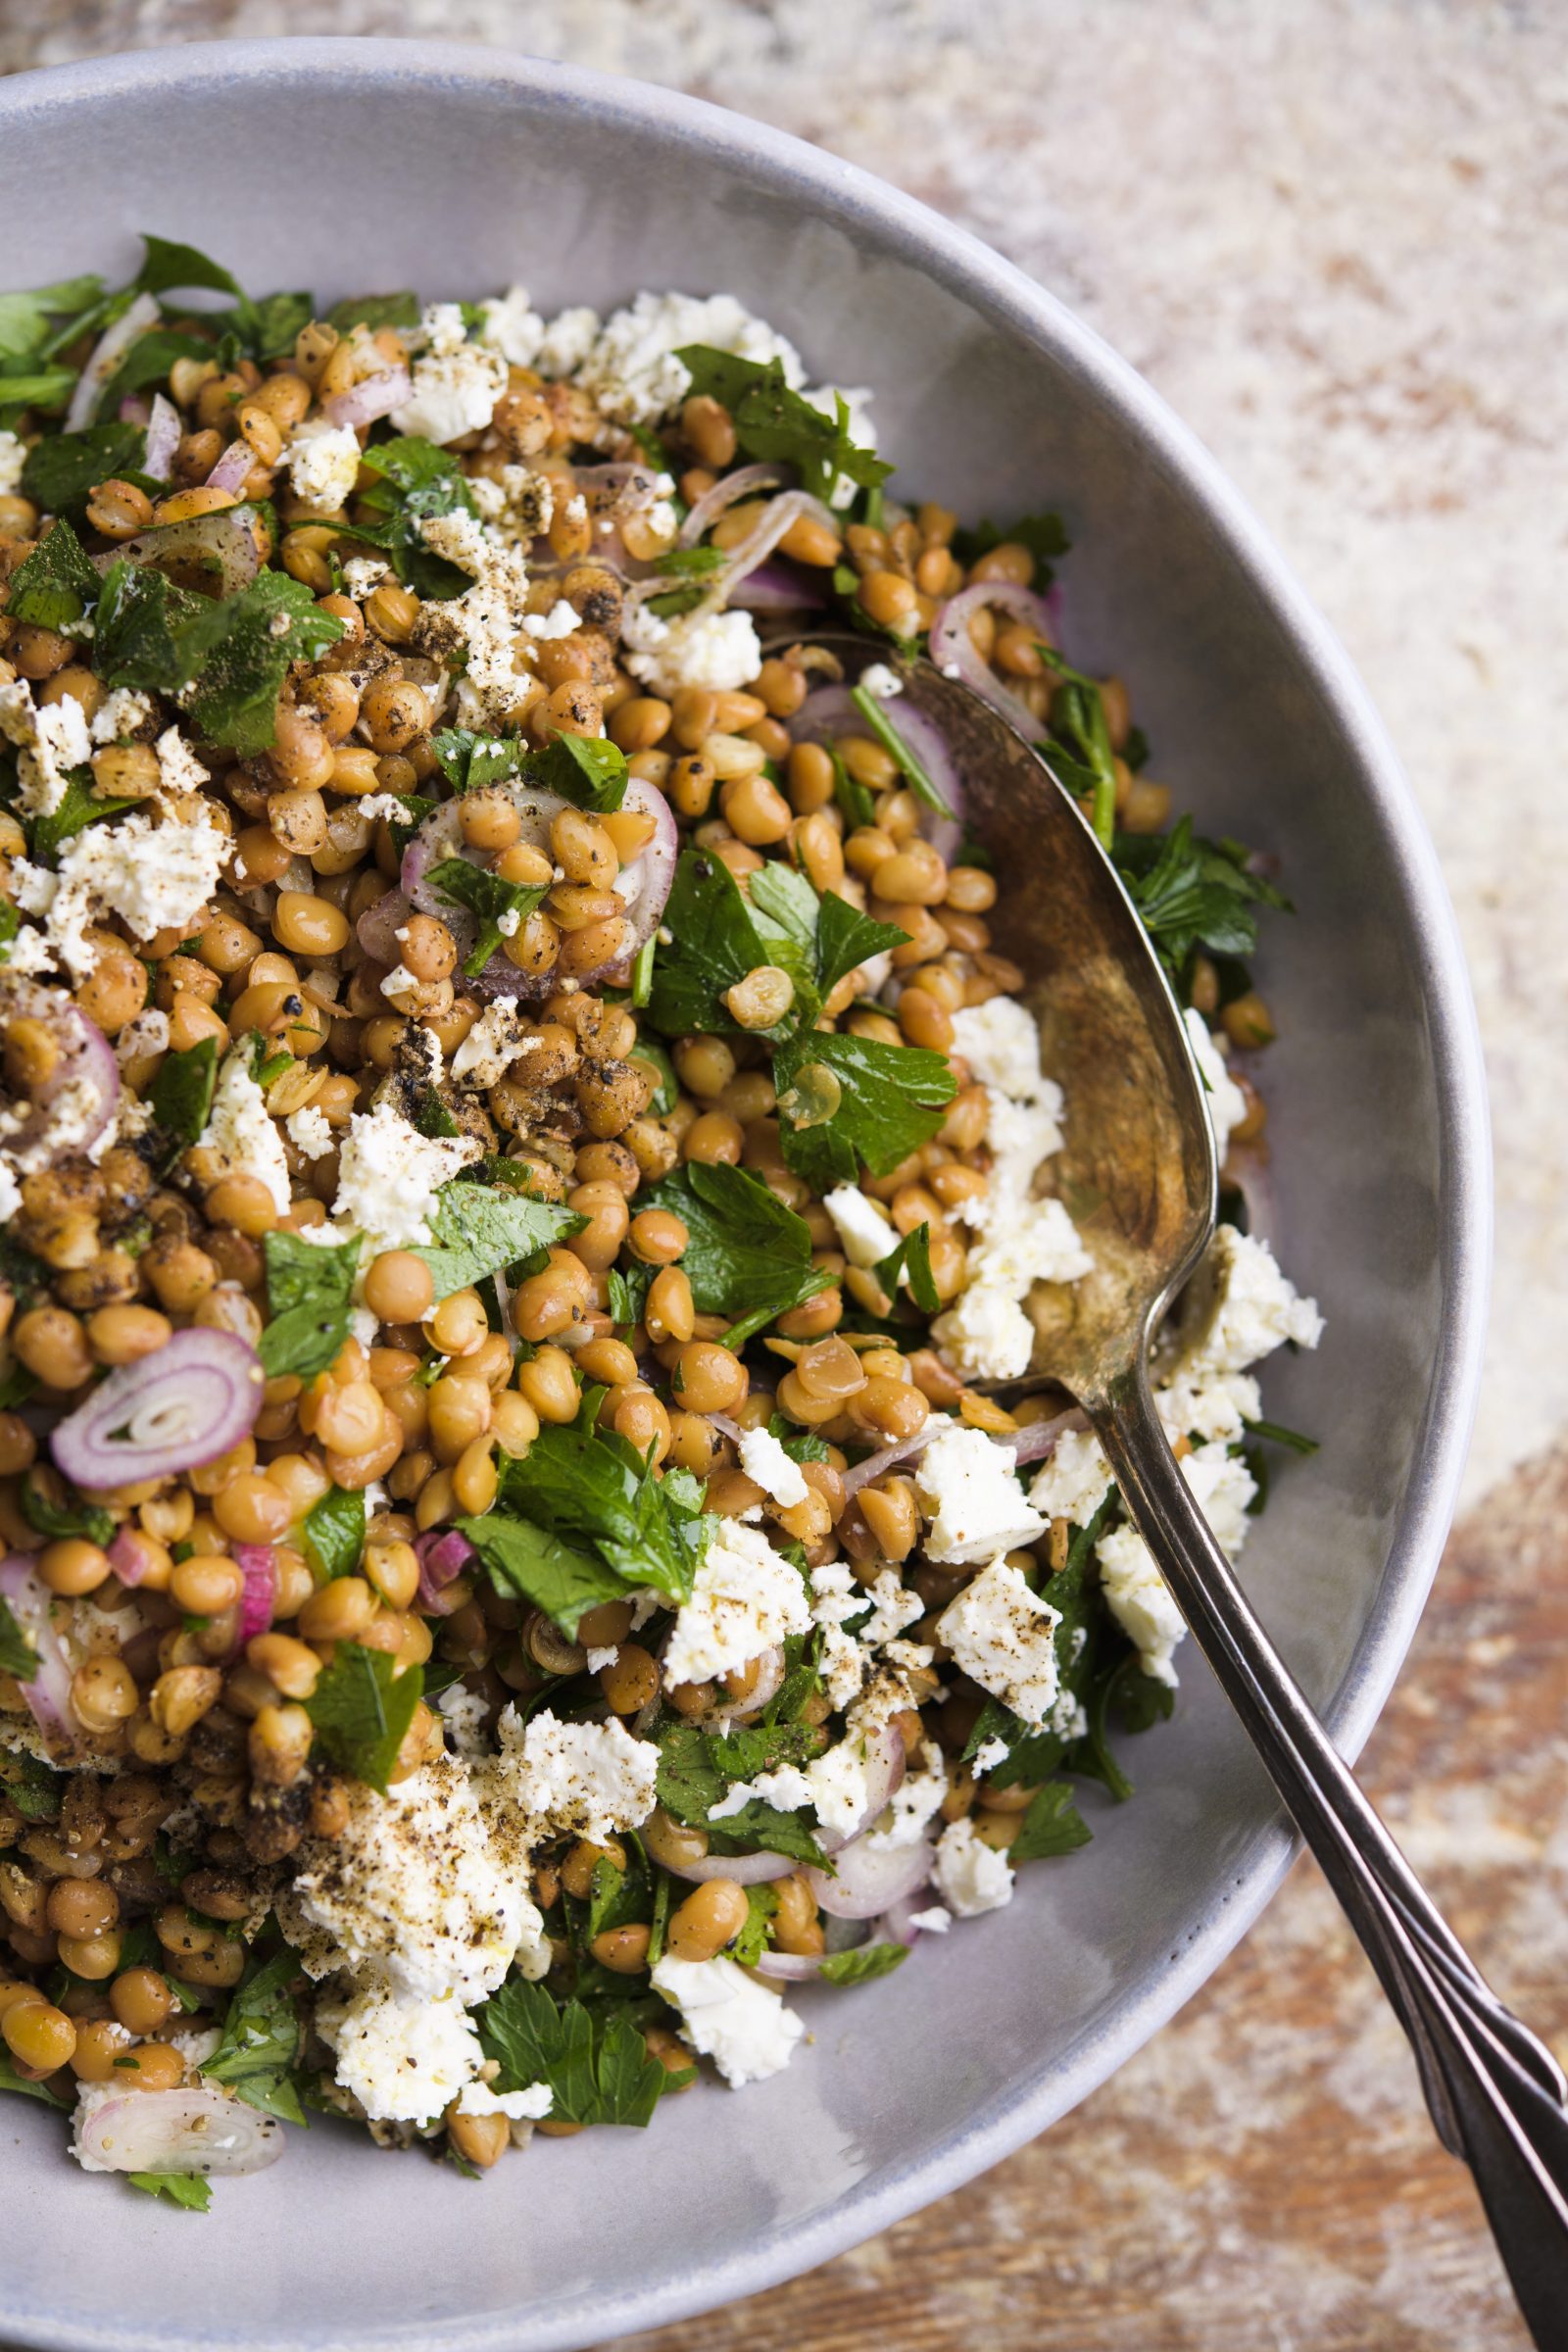 Garlicky Lentil and Parsley Salad with Feta